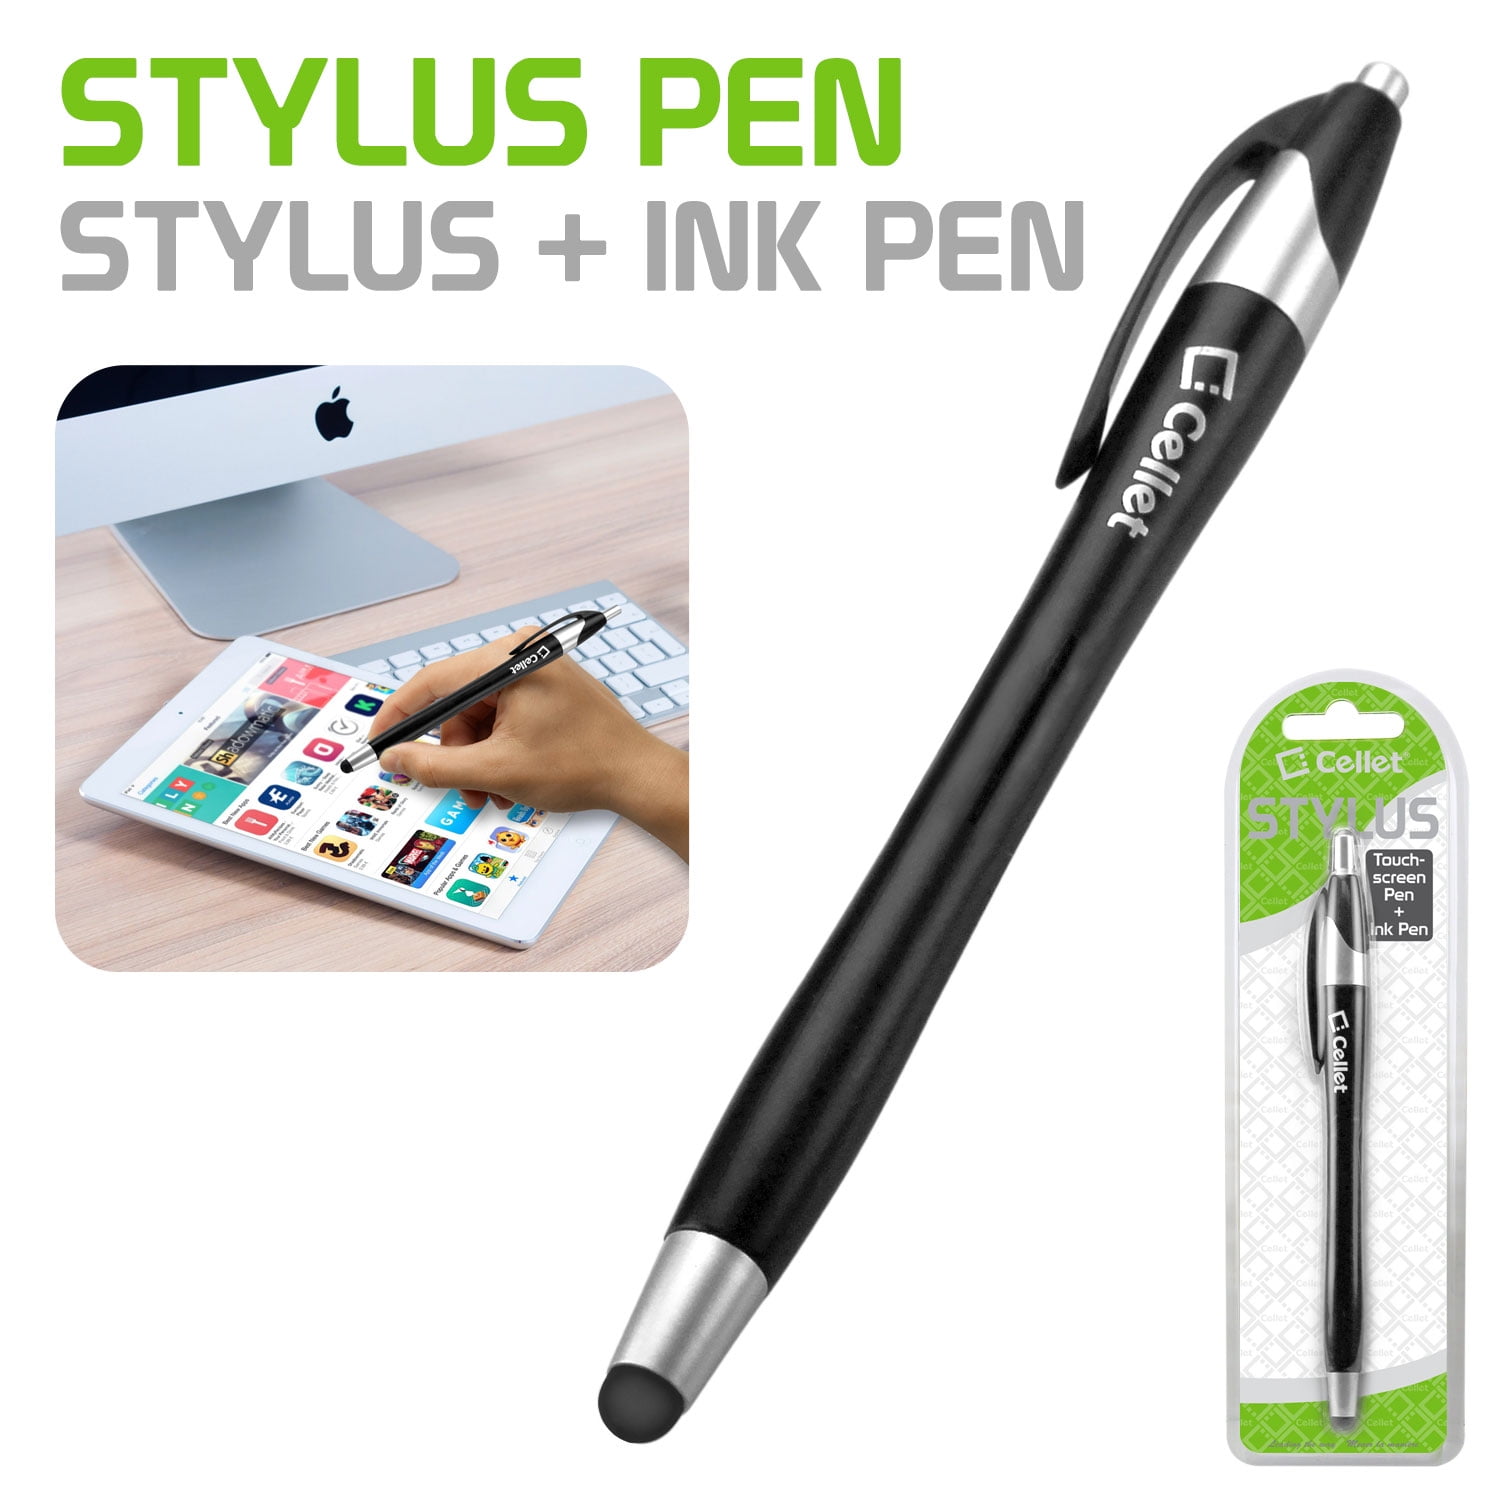 10 Black 2-in-1 Touch Screen Stylus Ballpoint Pen iPad iPhone Smartphone Tablet